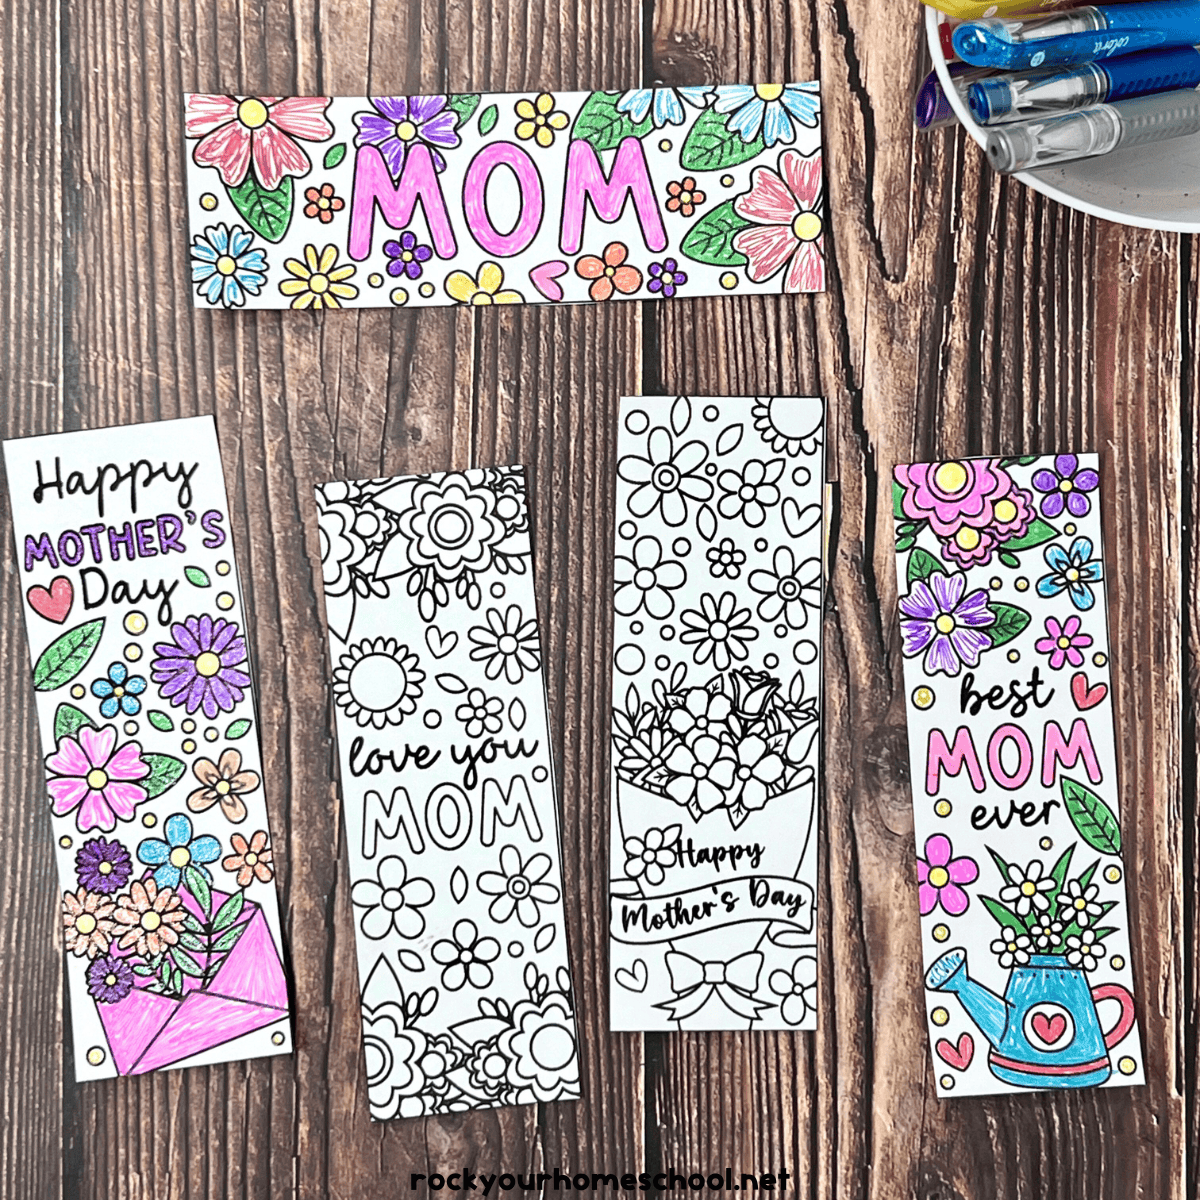 Mother's Day Bookmarks to Color: Fun Ideas for This Free Set